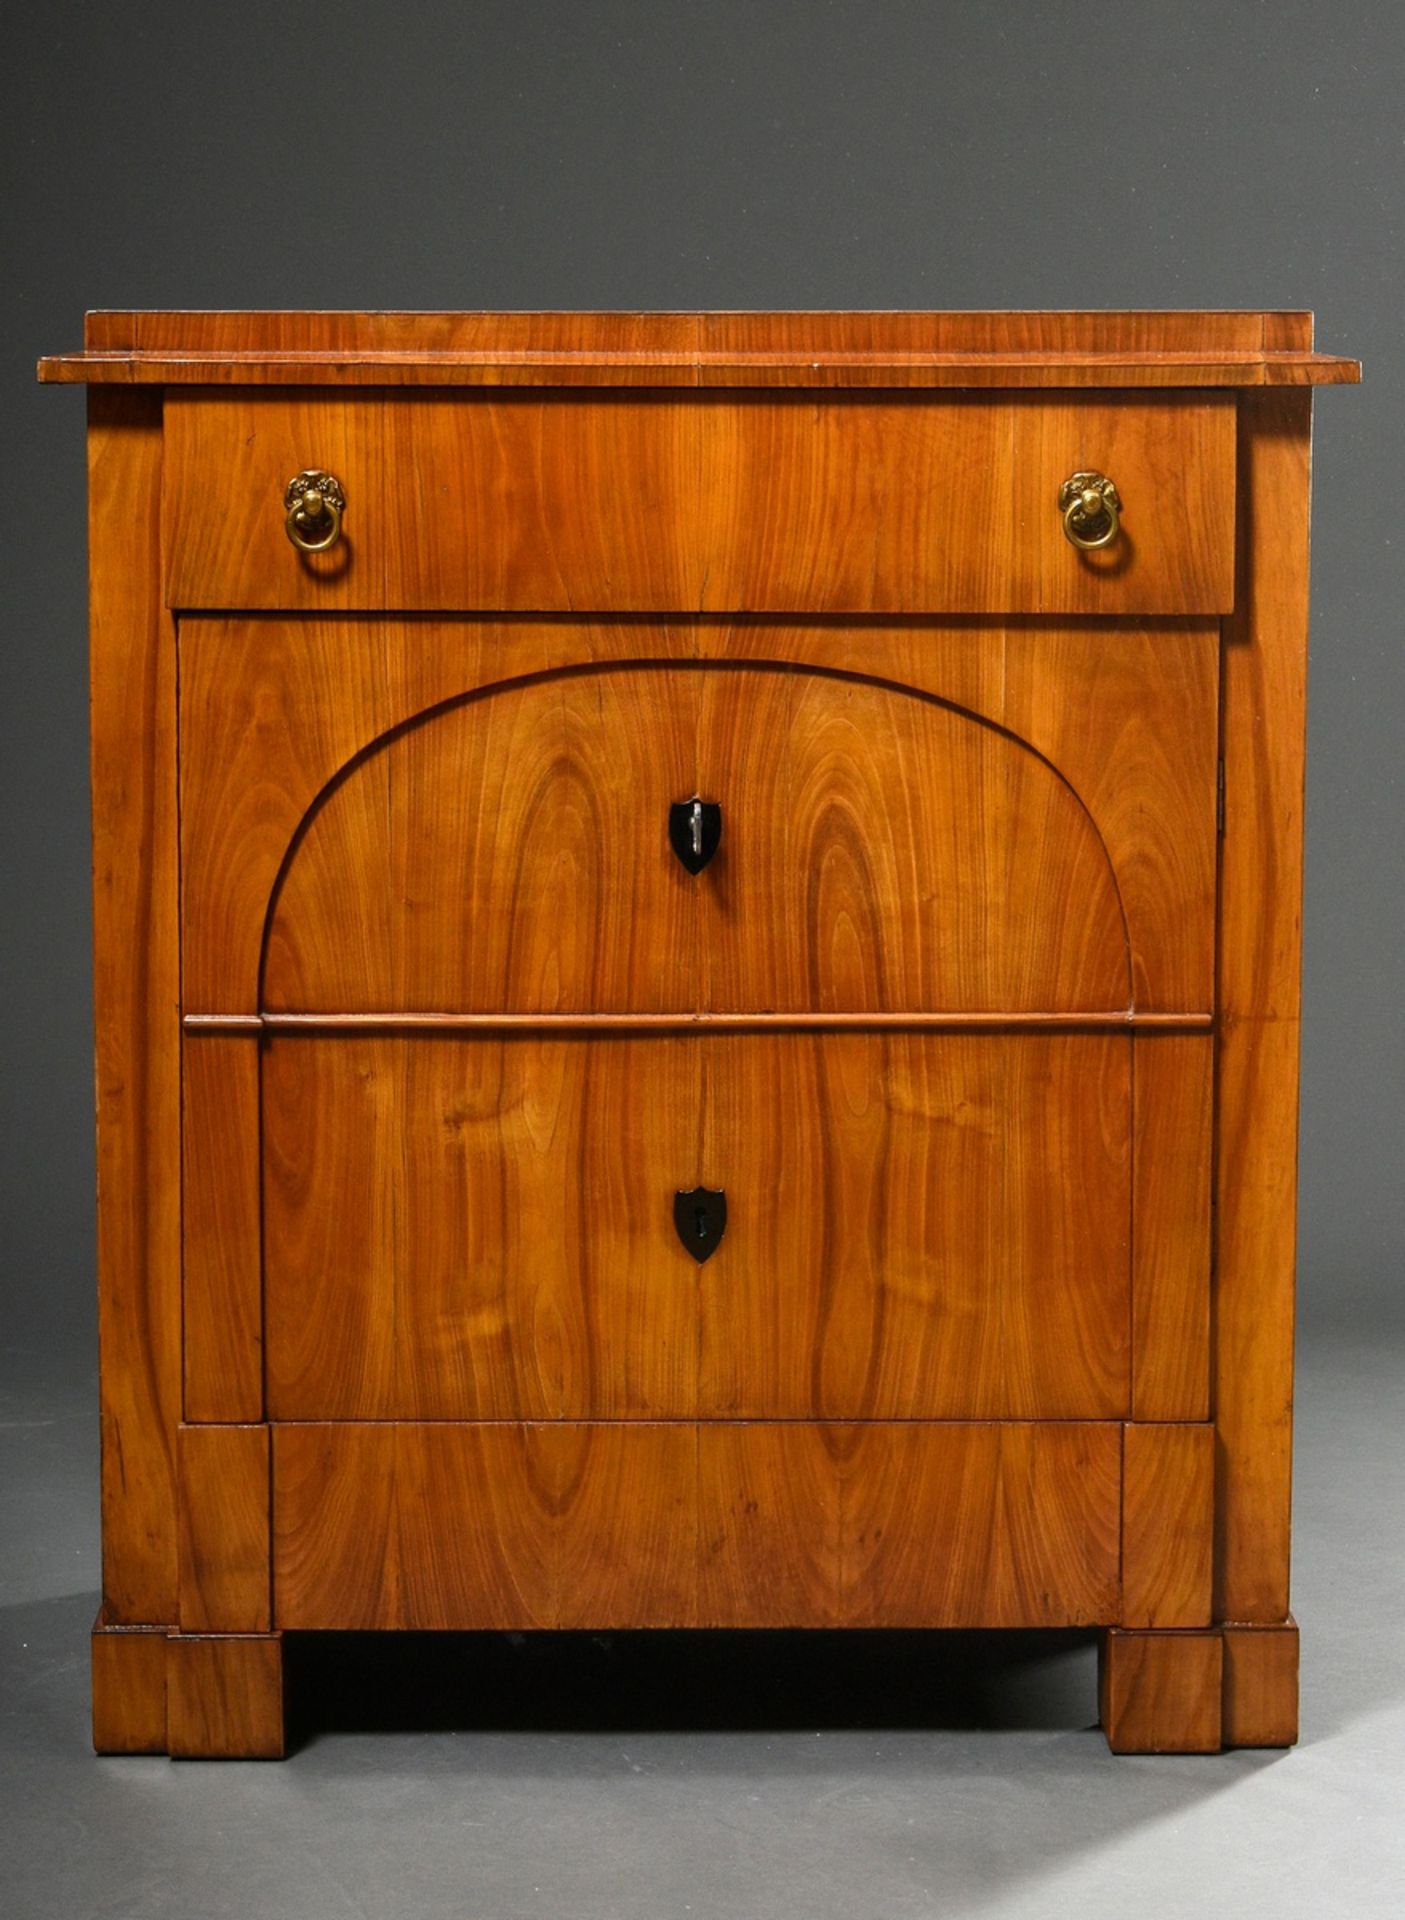 Small console dresser with segmental arch in the door, cherry/softwood veneer, 1st quarter 19th c., - Image 2 of 6